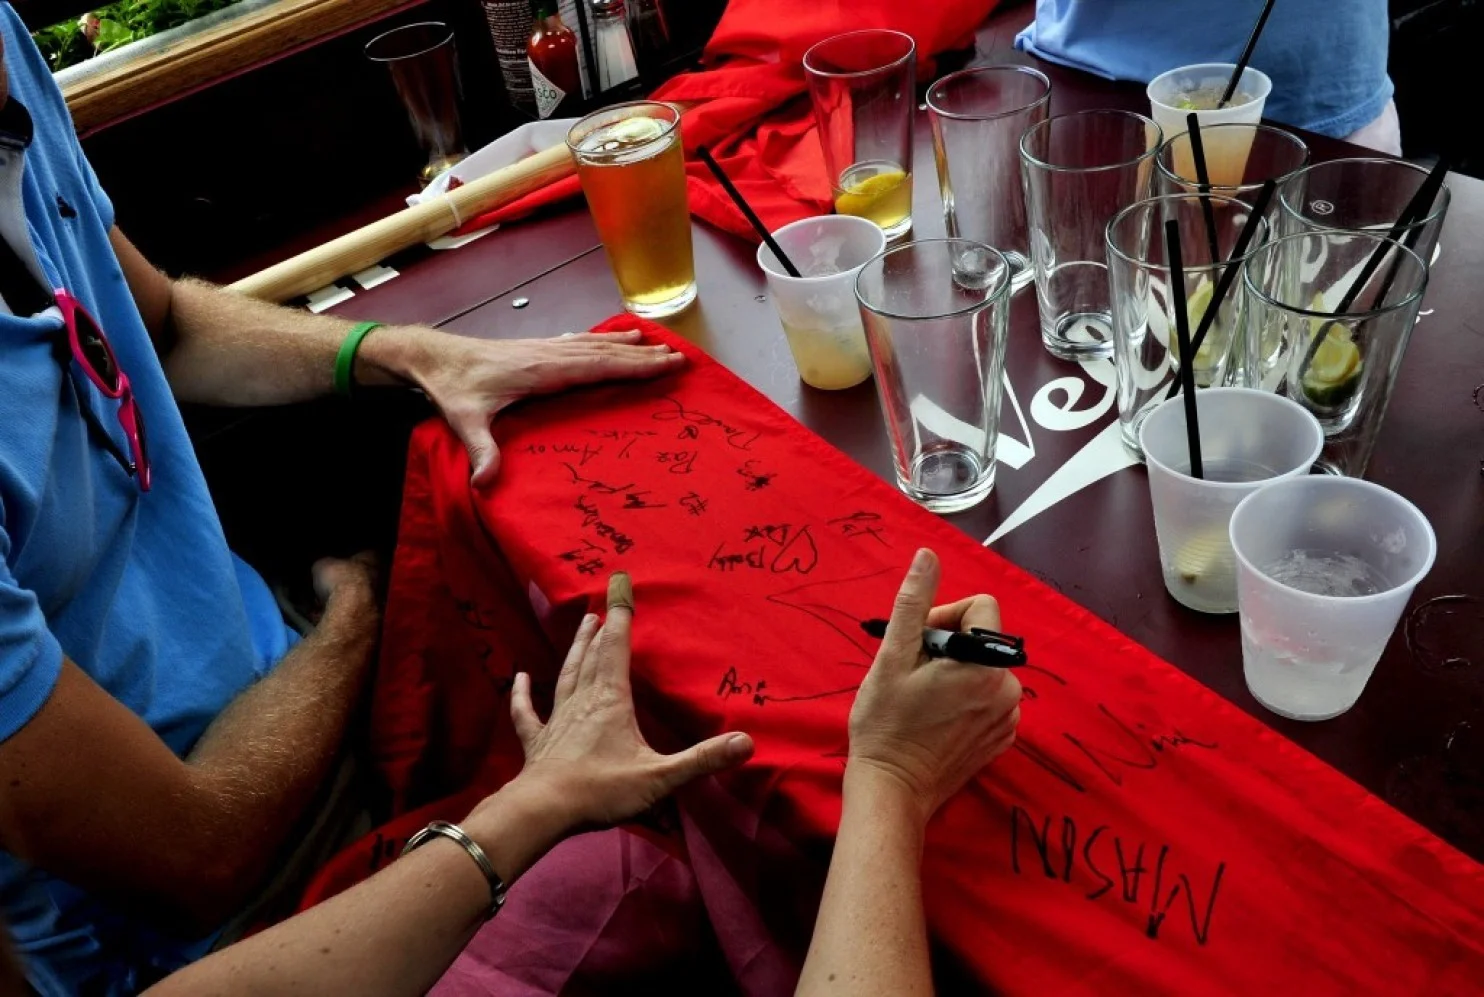 At Nellie’s Sports Bar, Anna McCrerey of Baltimore, was one of many who signed an equality flag brought to the bar to celebrate the historic Supreme Court ruling on Friday. (Michael S. Williamson/The Washington Post)